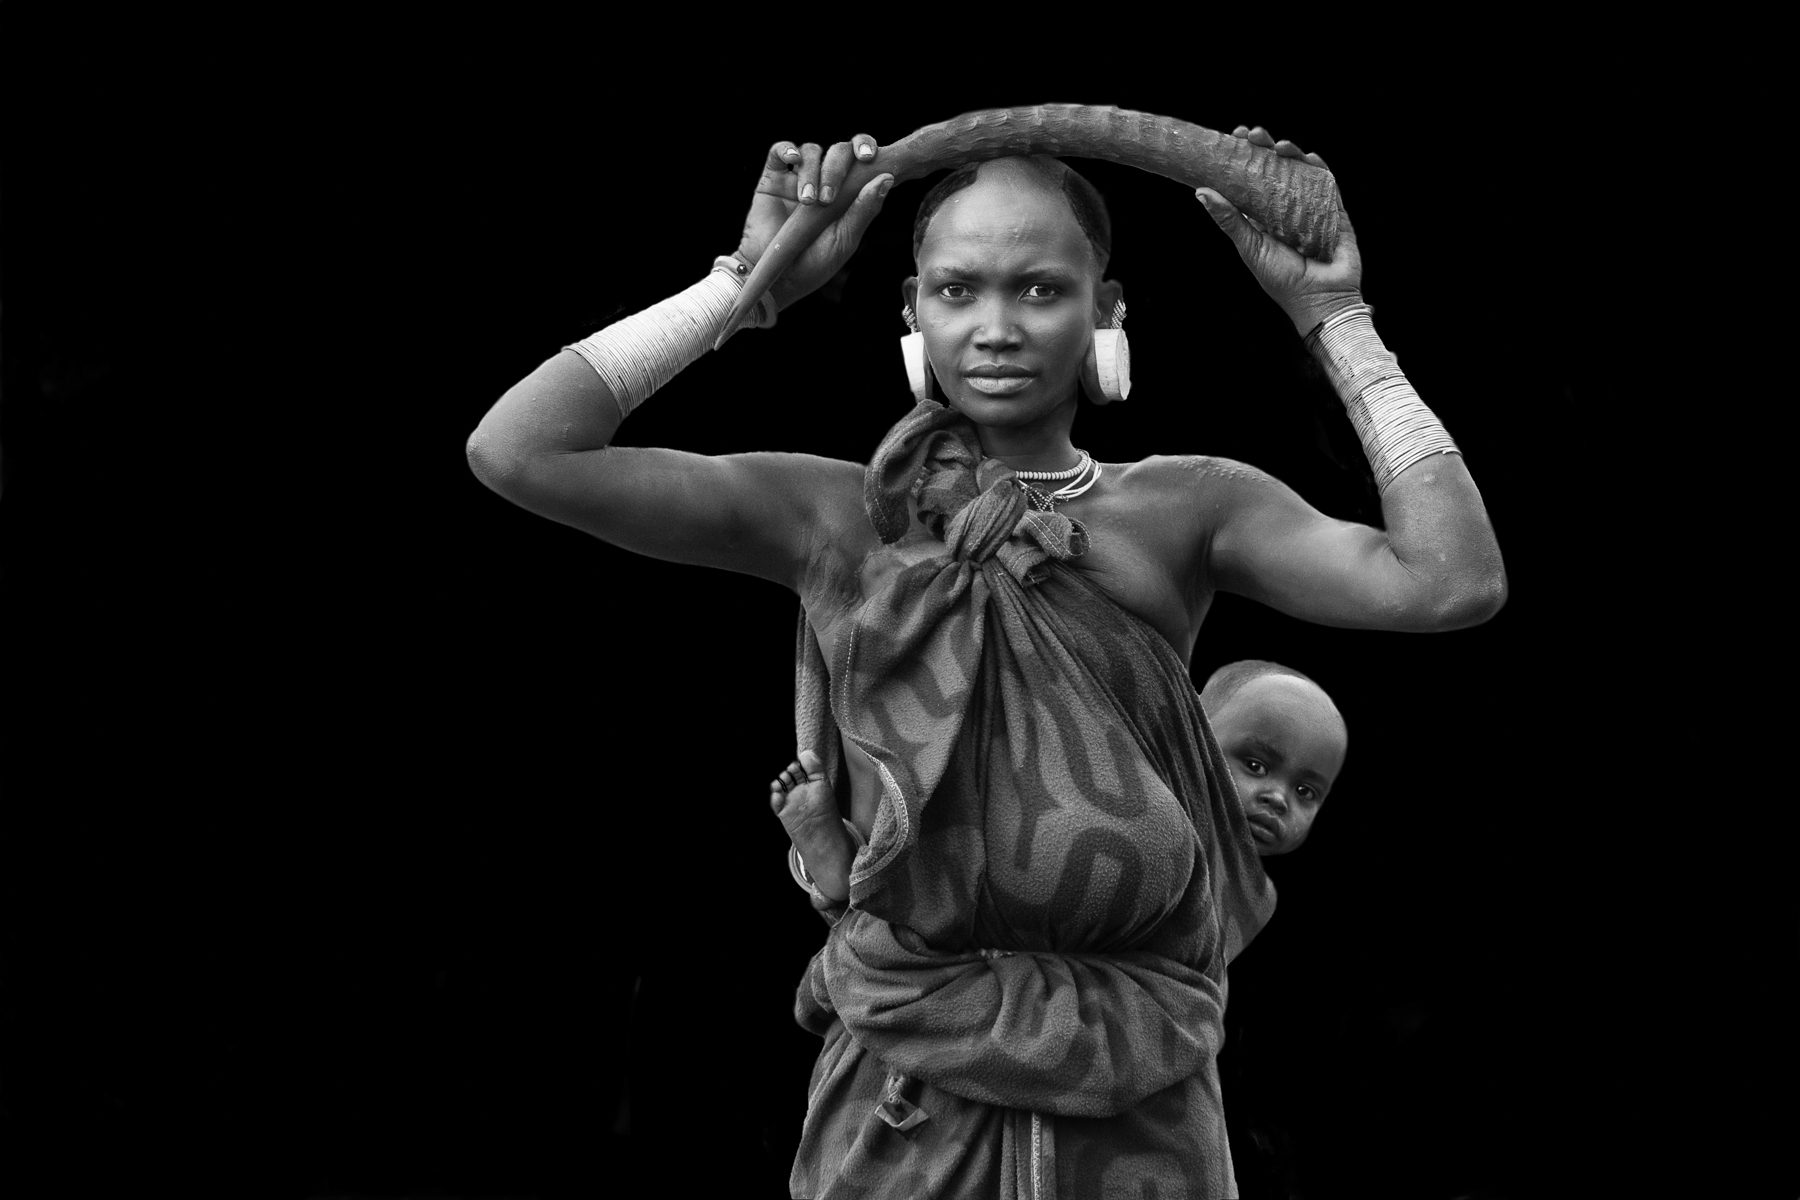 Black and white portraits of the Suri people in the Omo Valley with Wild Images